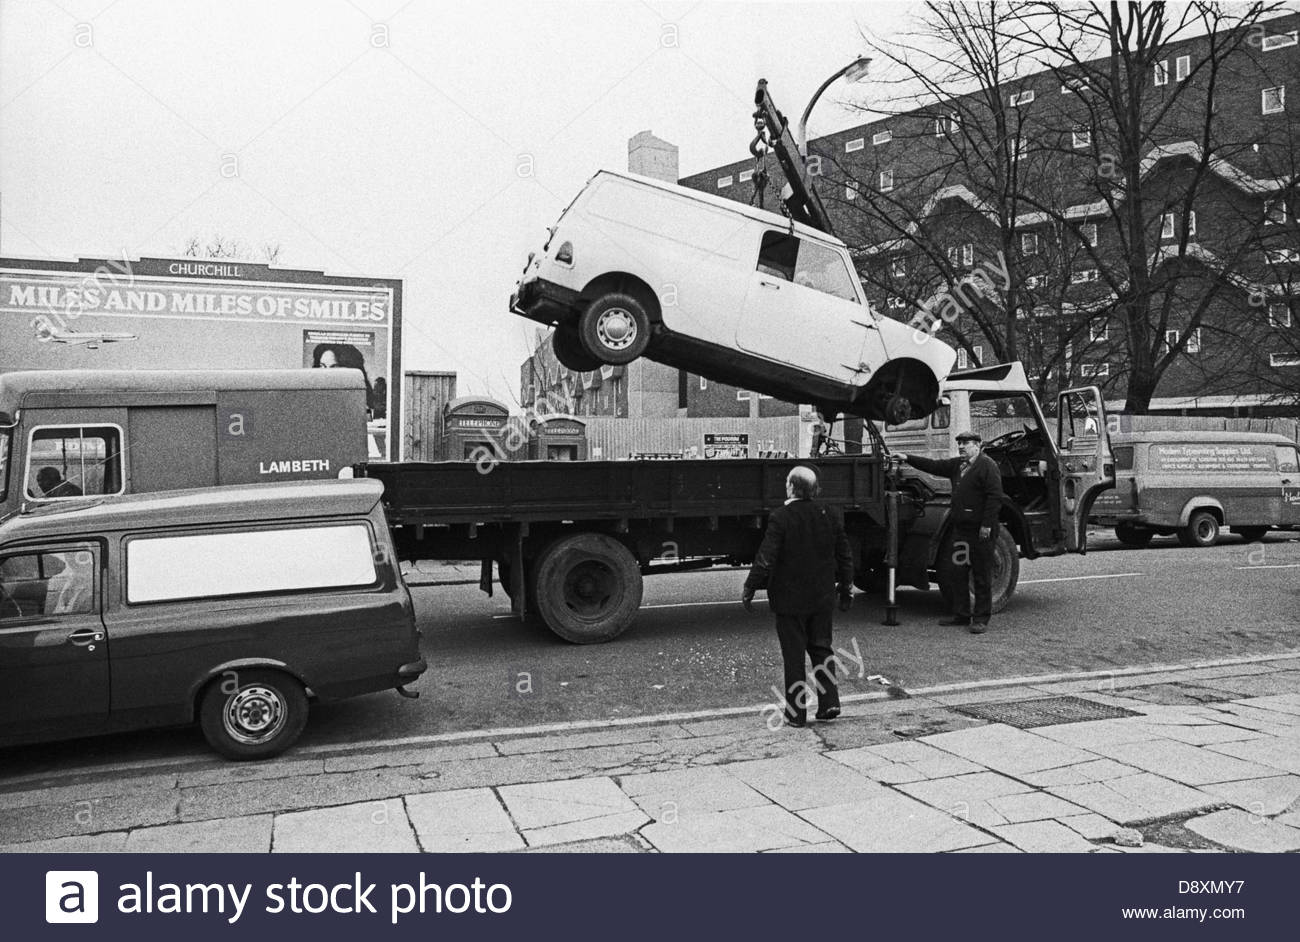 minivan-being-removed-from-nearby-coldharbour-lane-brixton-in-1981-D8XMY7.jpg